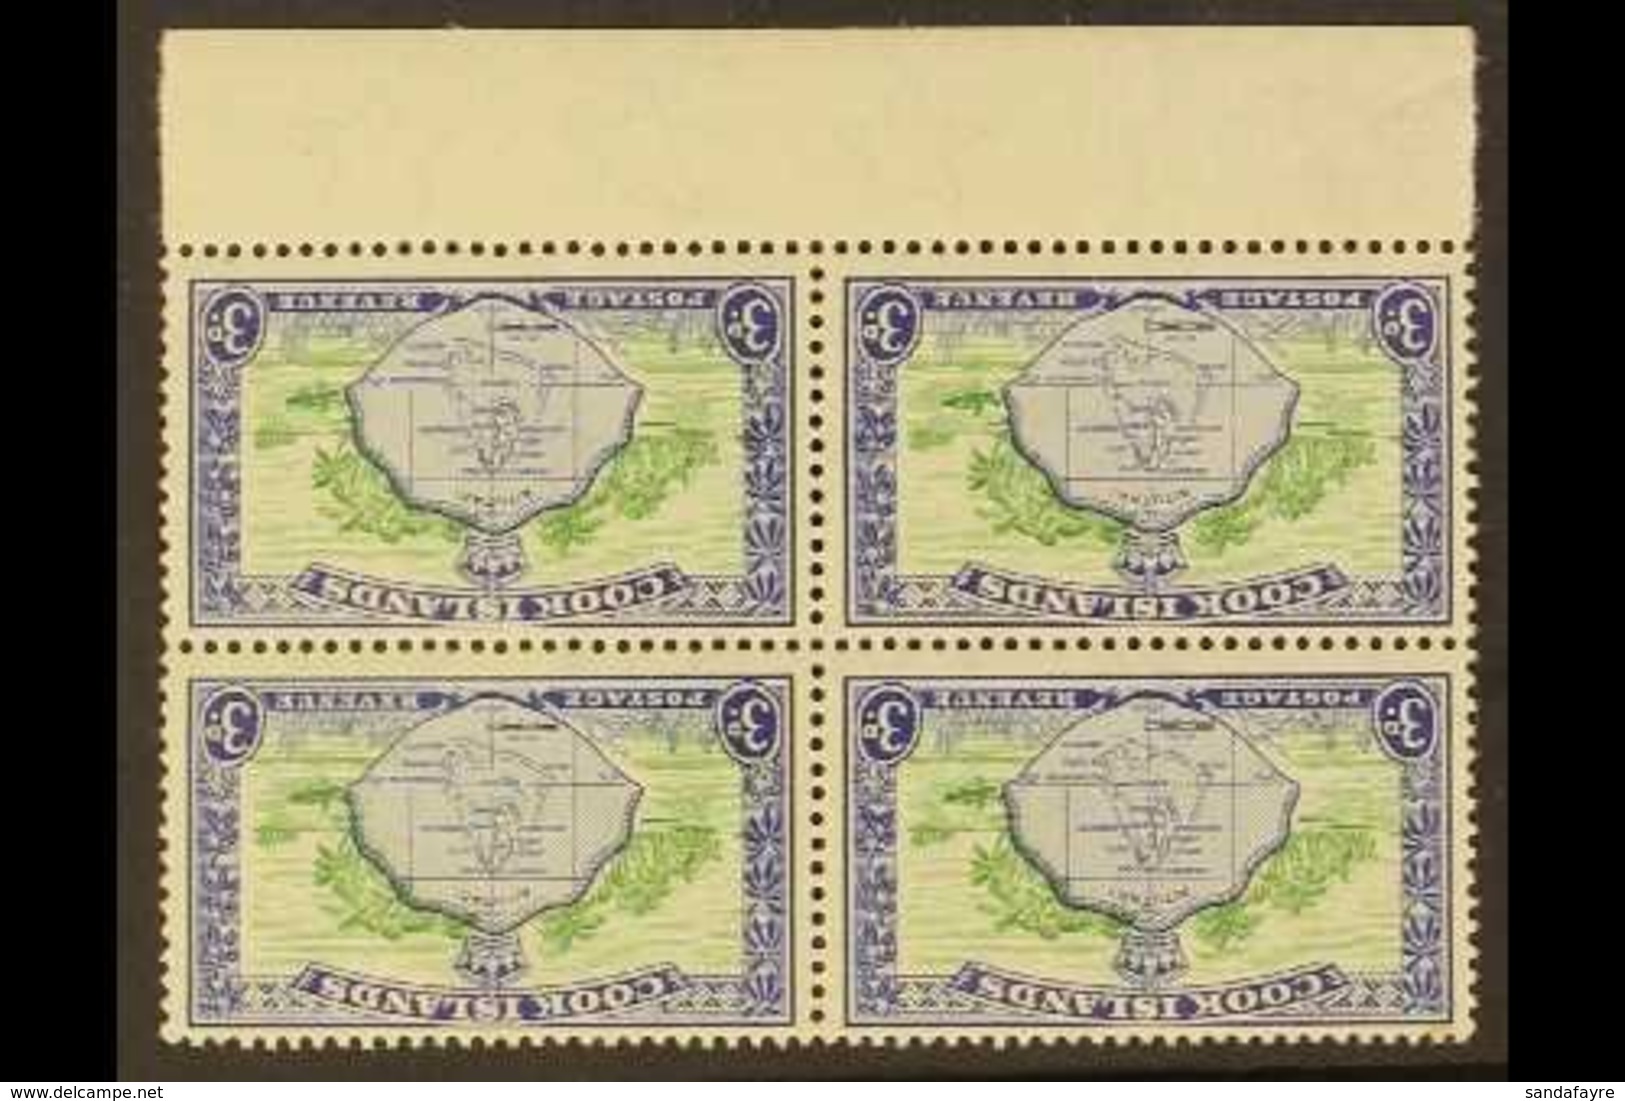 1949-61 3d Green & Ultramarine Pictorial With WATERMARK INVERTED Variety, SG 153aw, Very Fine Mint Lower Marginal BLOCK  - Cook